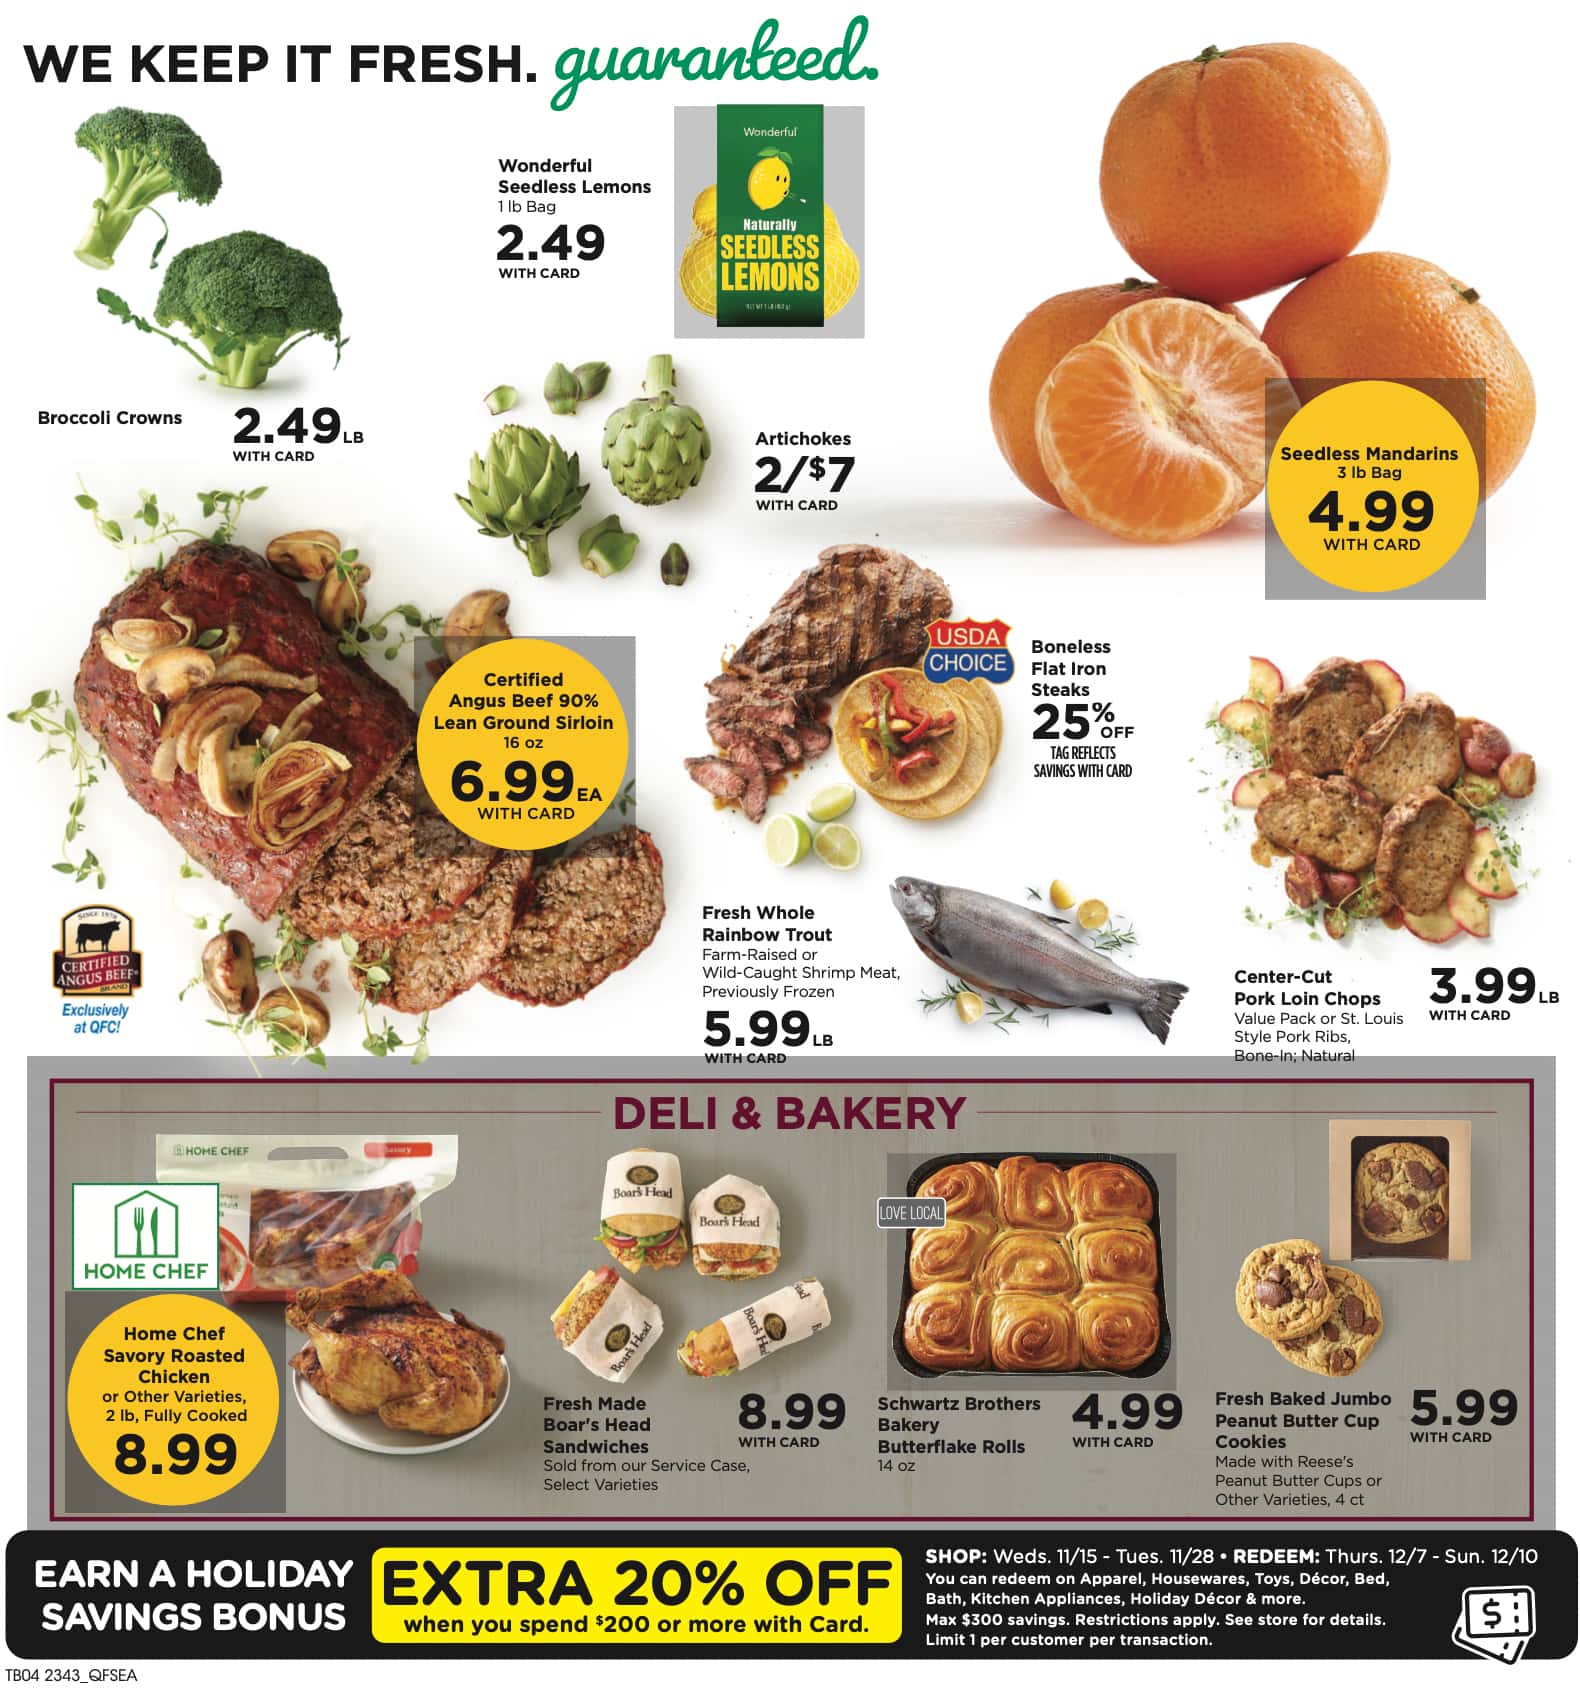 QFC Black Friday July 2024 Weekly Sales, Deals, Discounts and Digital Coupons.